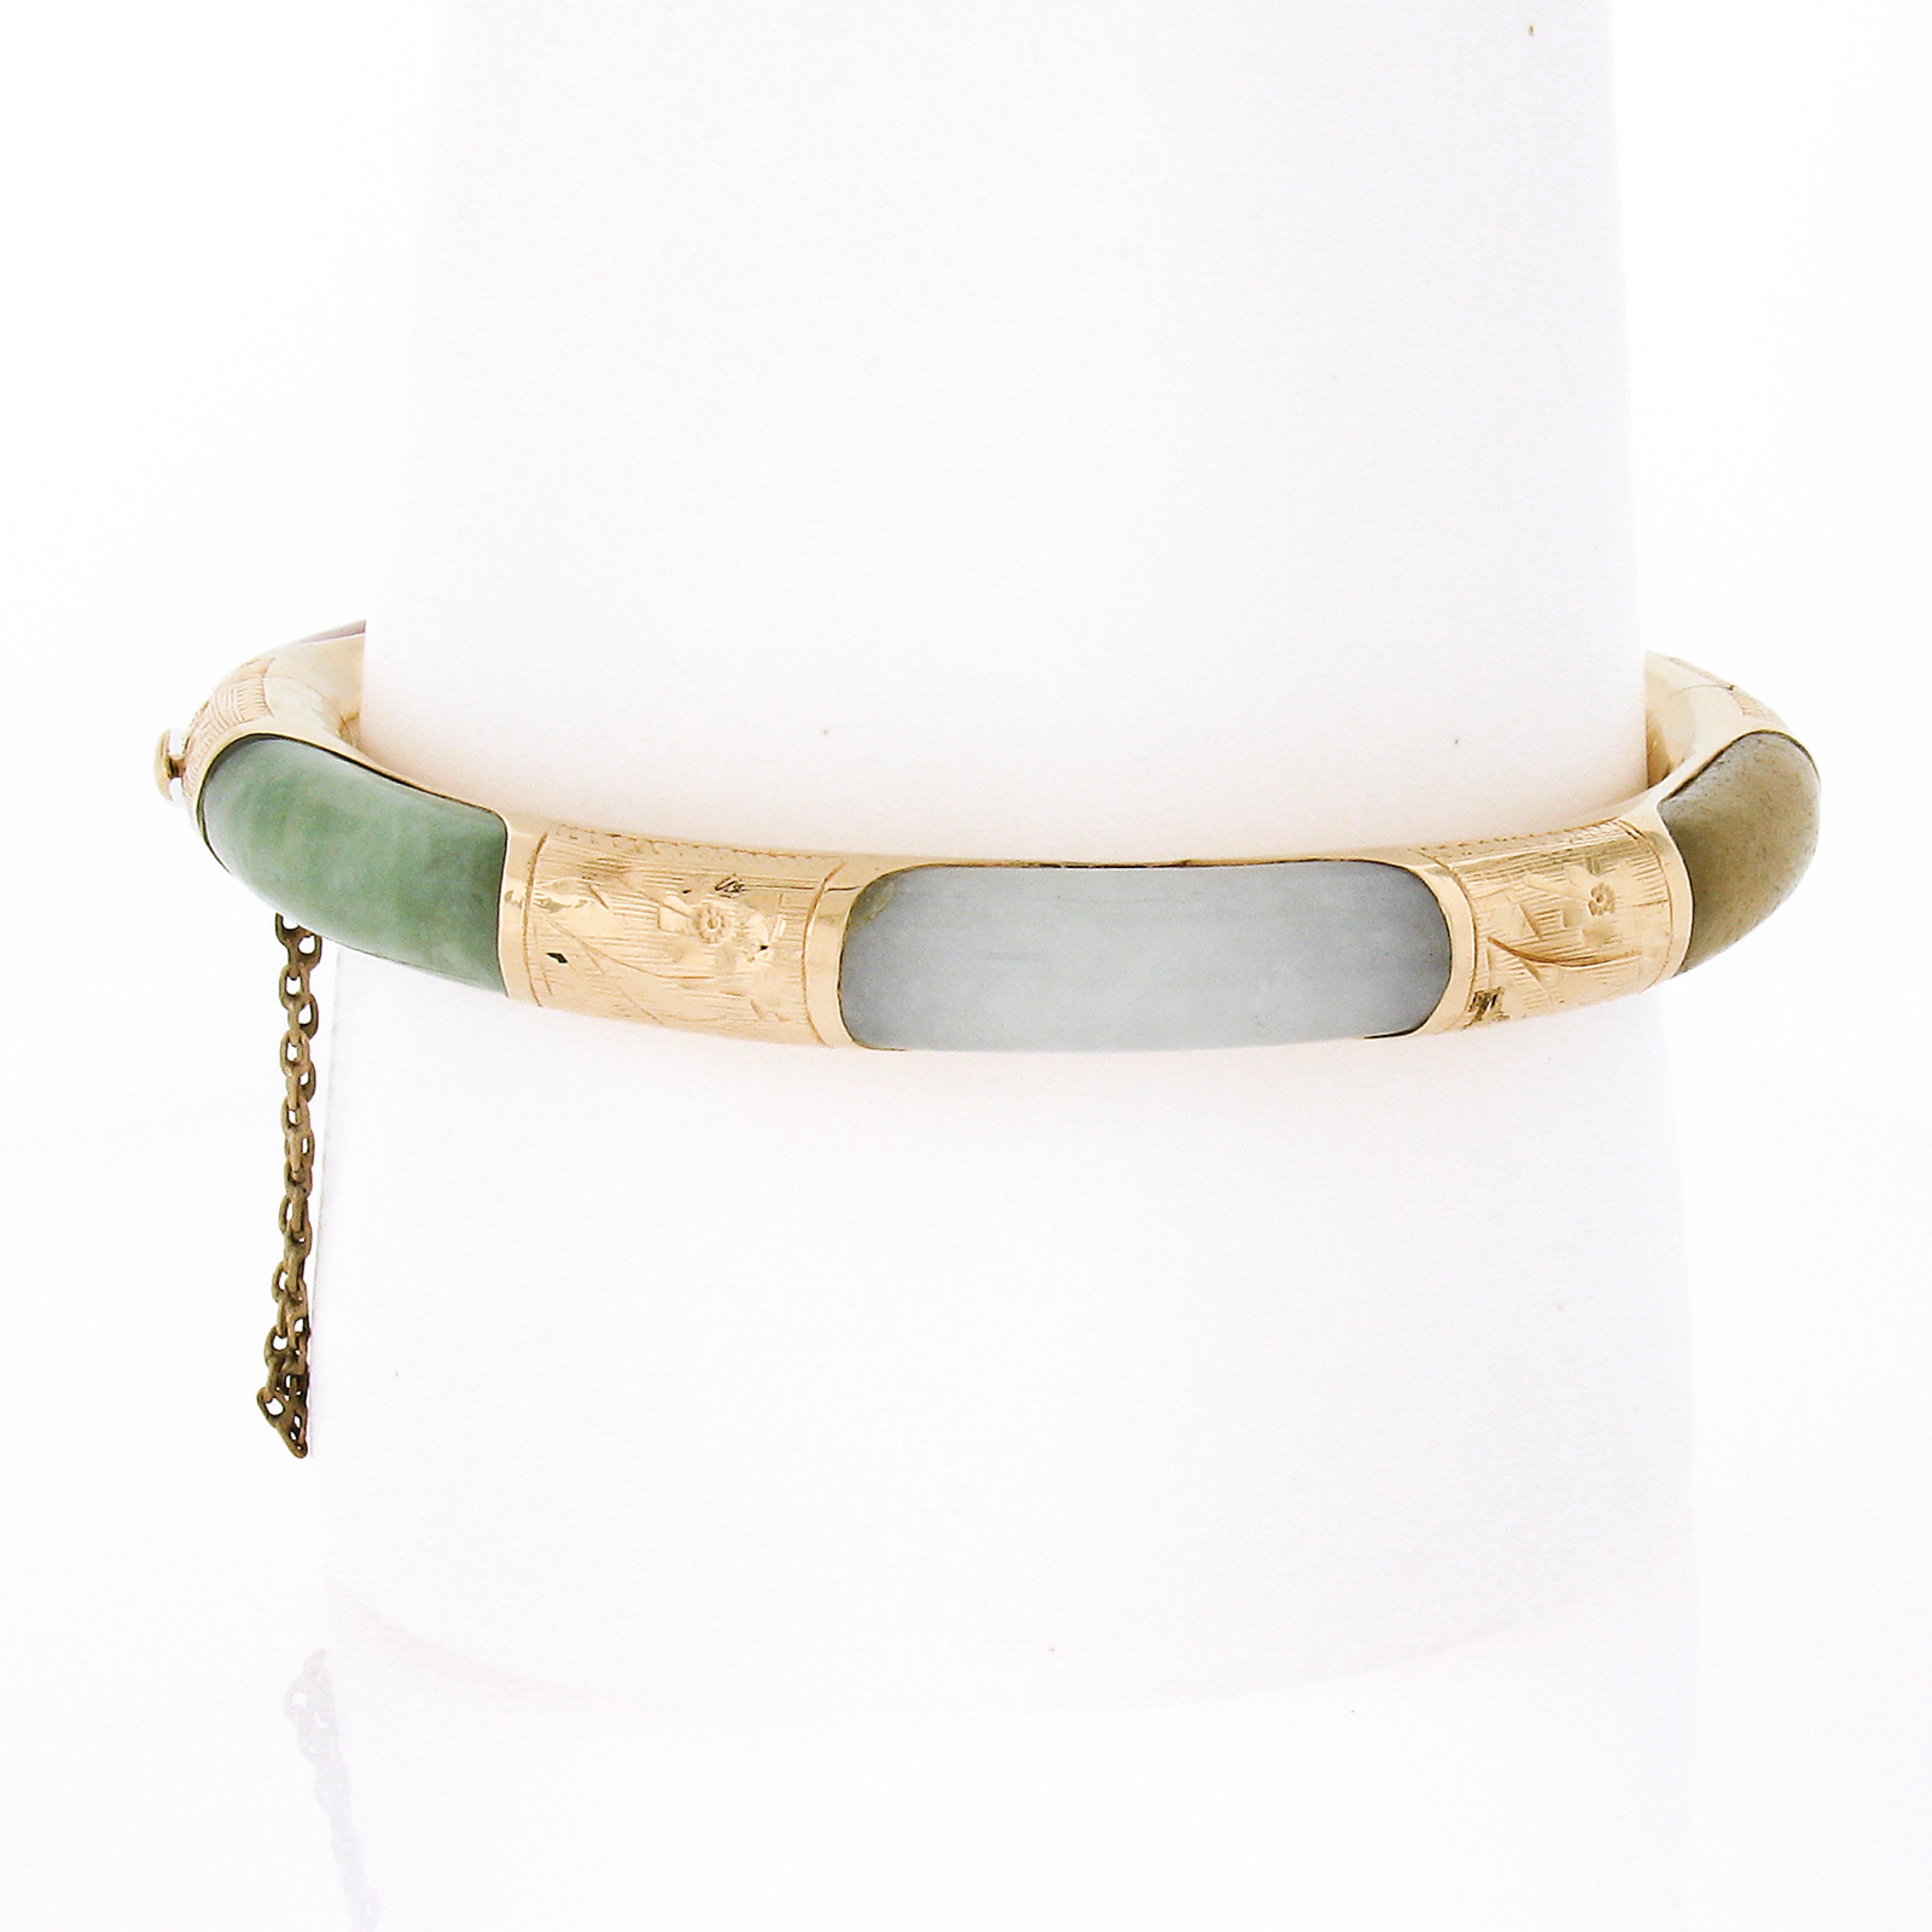 This unique vintage bracelet was crafted in solid 14k yellow gold and features 6 long and curved jade stones - each showing a different color including orange, light green, gray, white, yellow, and black color. The jades are nicely set at the